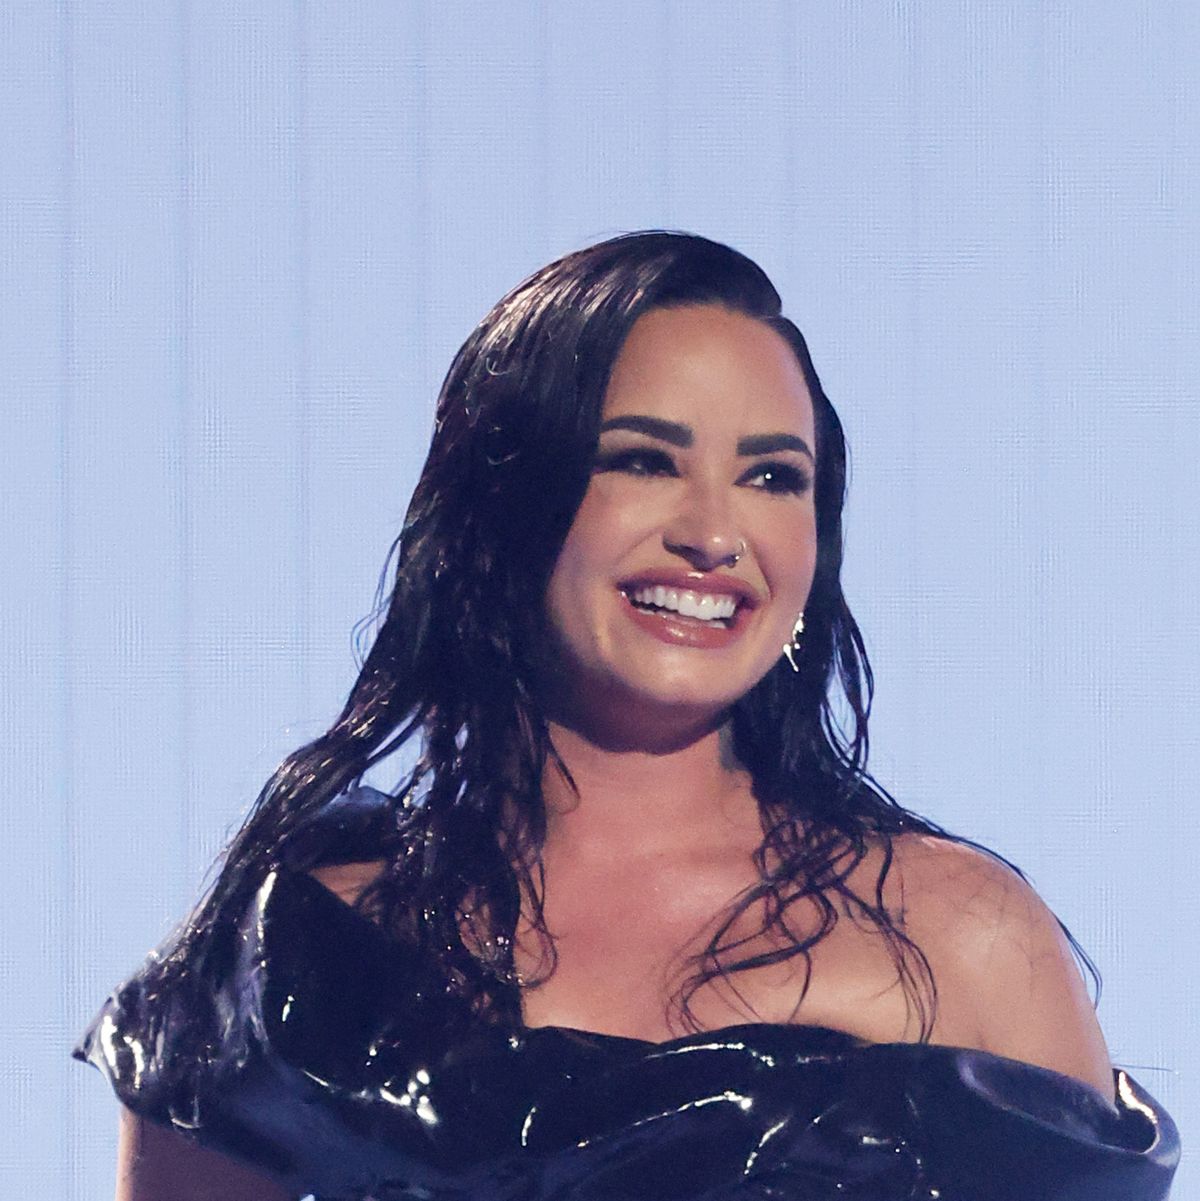 Who Is Demi Lovato's Dating Now? Meet Singer's New Fiancé Jutes